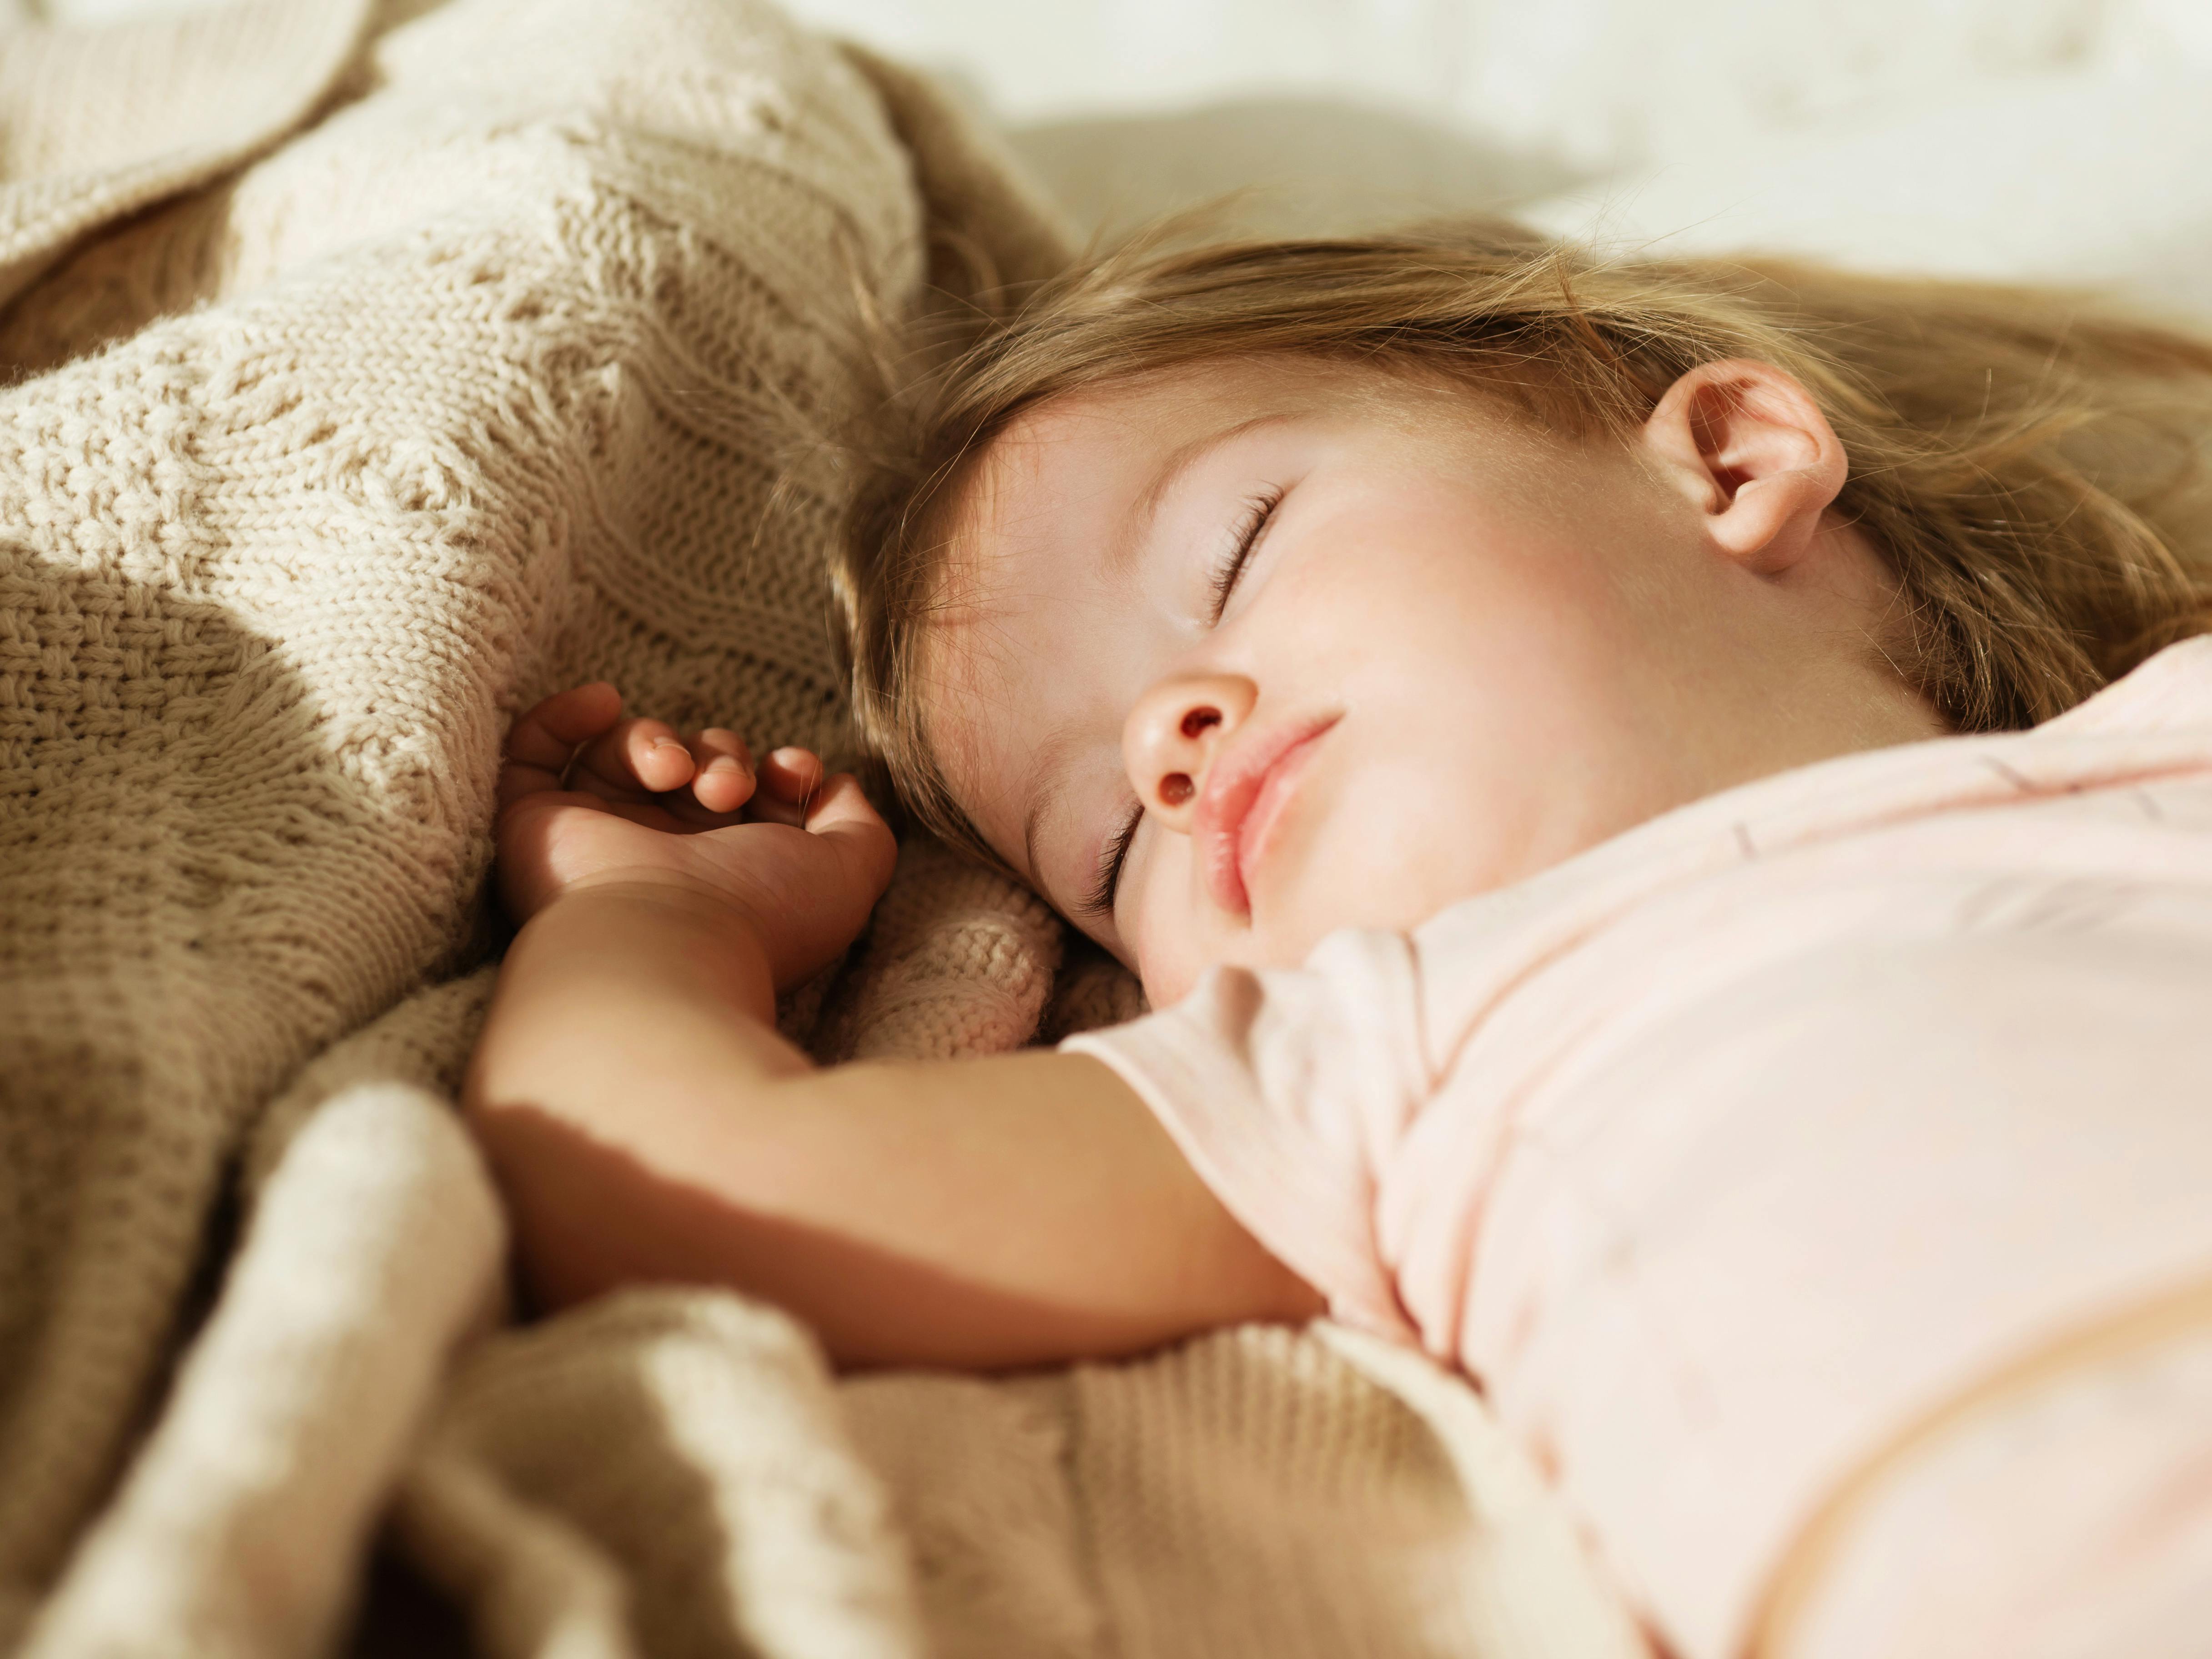 Sleeping little girl. Carefree sleep little baby with a soft toy on the bed. Close-up portrait of a beautiful sleeping child on knitted blanket. Sweet dreams